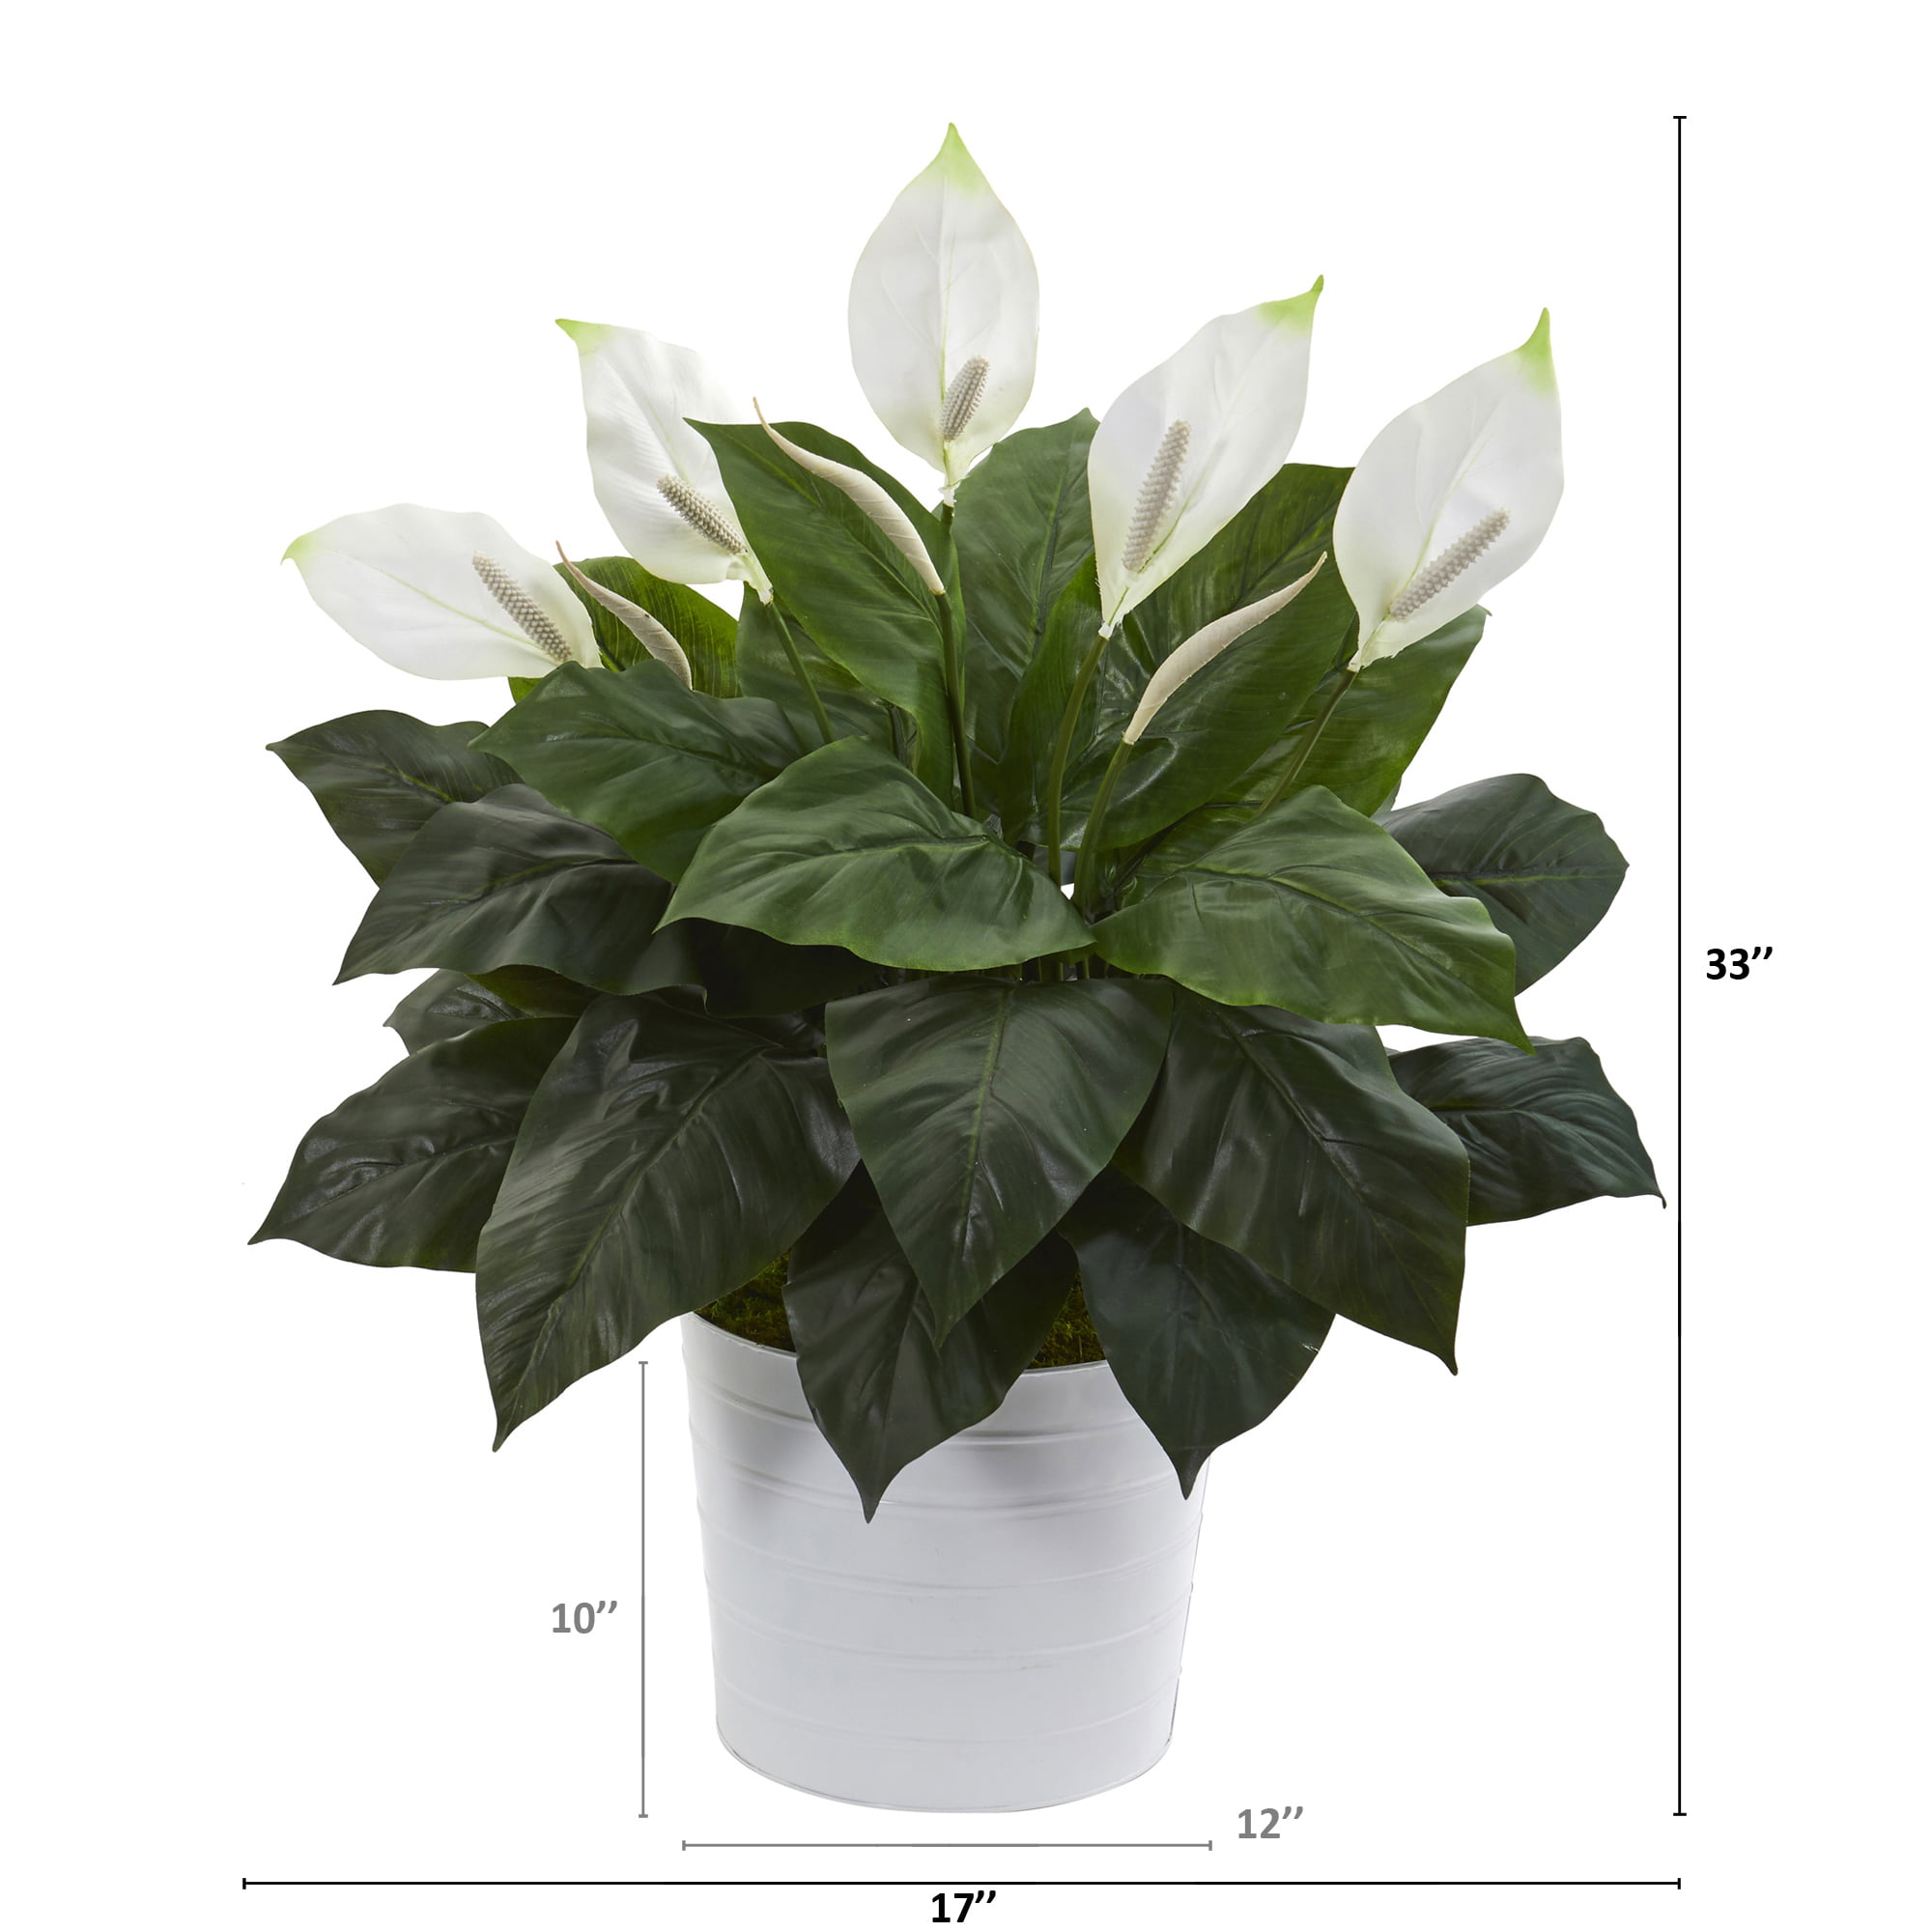 35" SPATHIPHYLLUM ARTIFICIAL SILK BUSH PLANT DAY LILLY IN POT TREE FLOWER FLORAL 